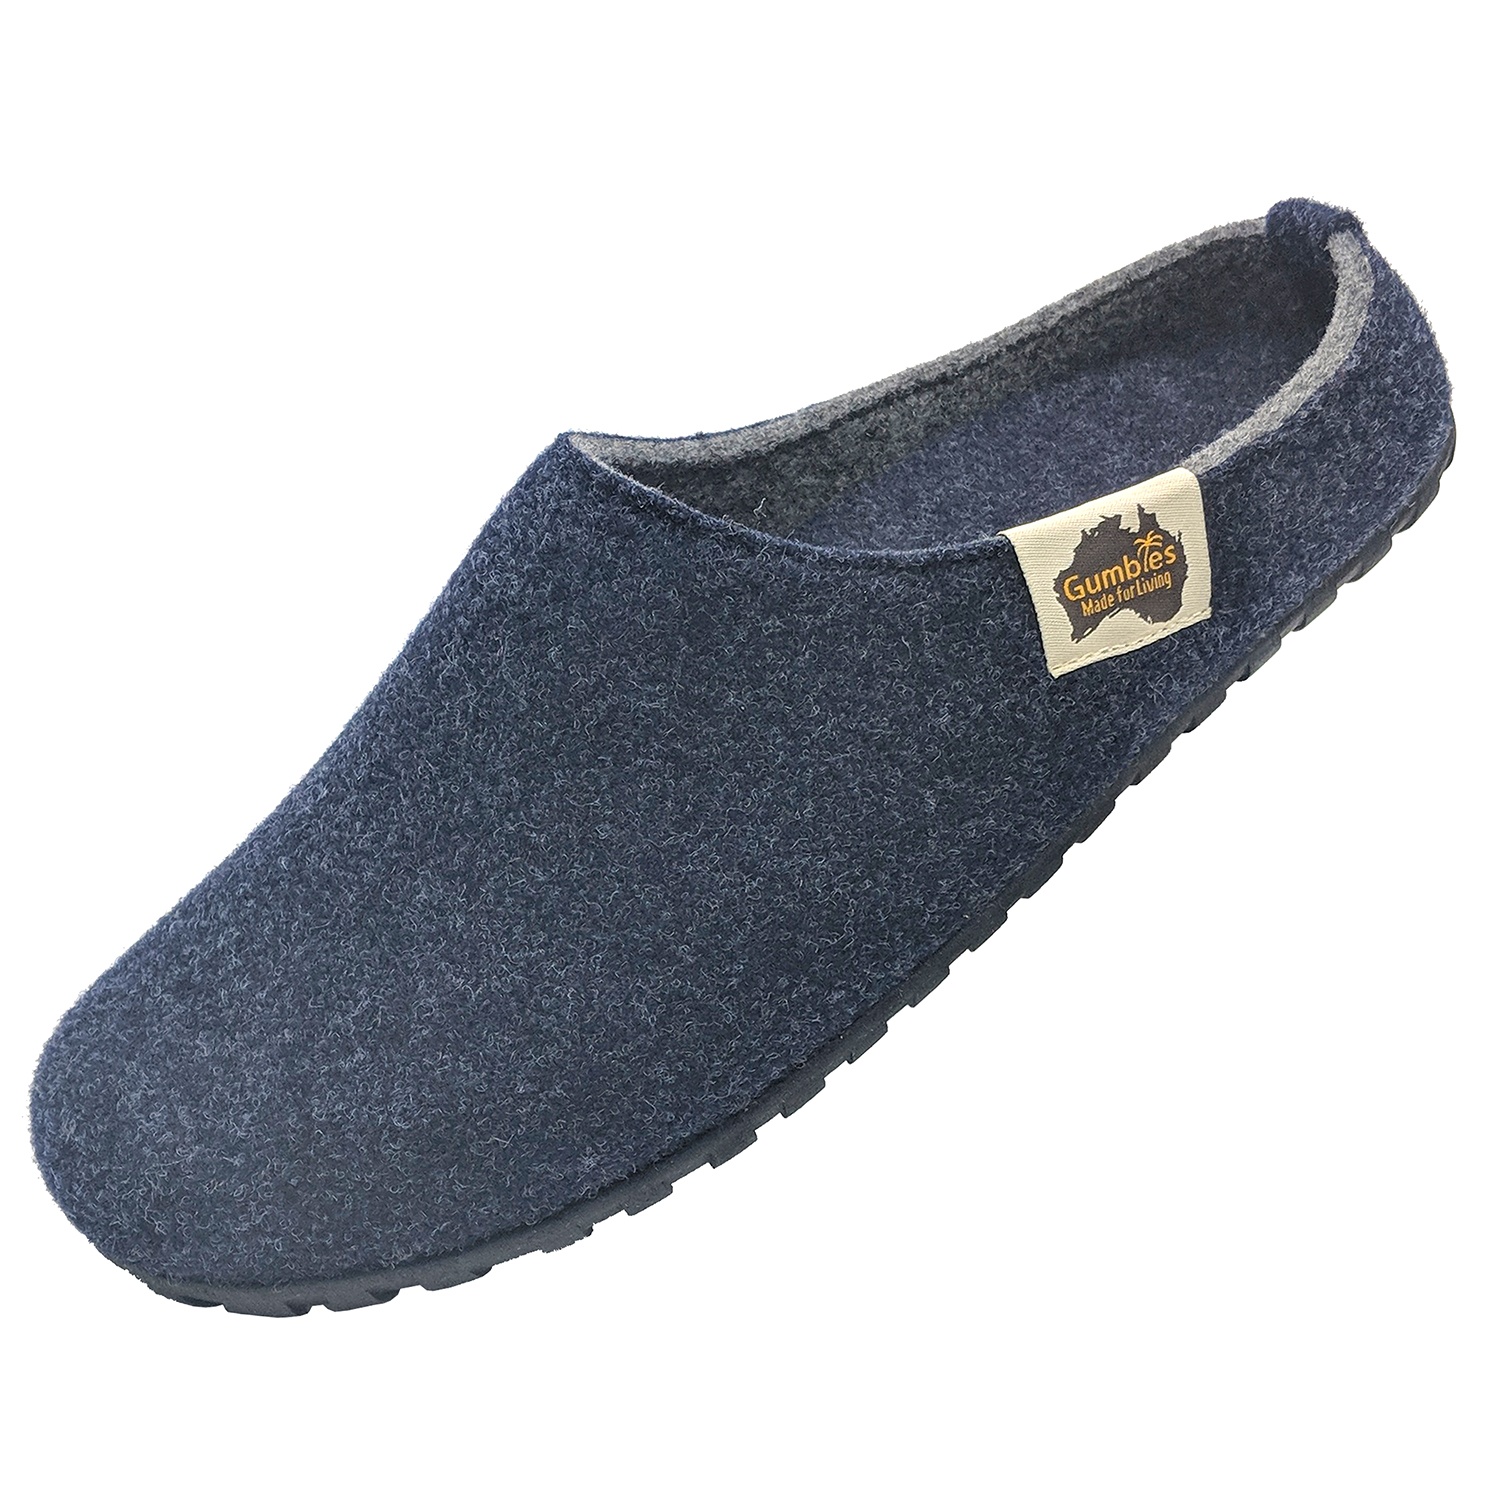 GUMBIES – Outback Slipper, Navy Grey 